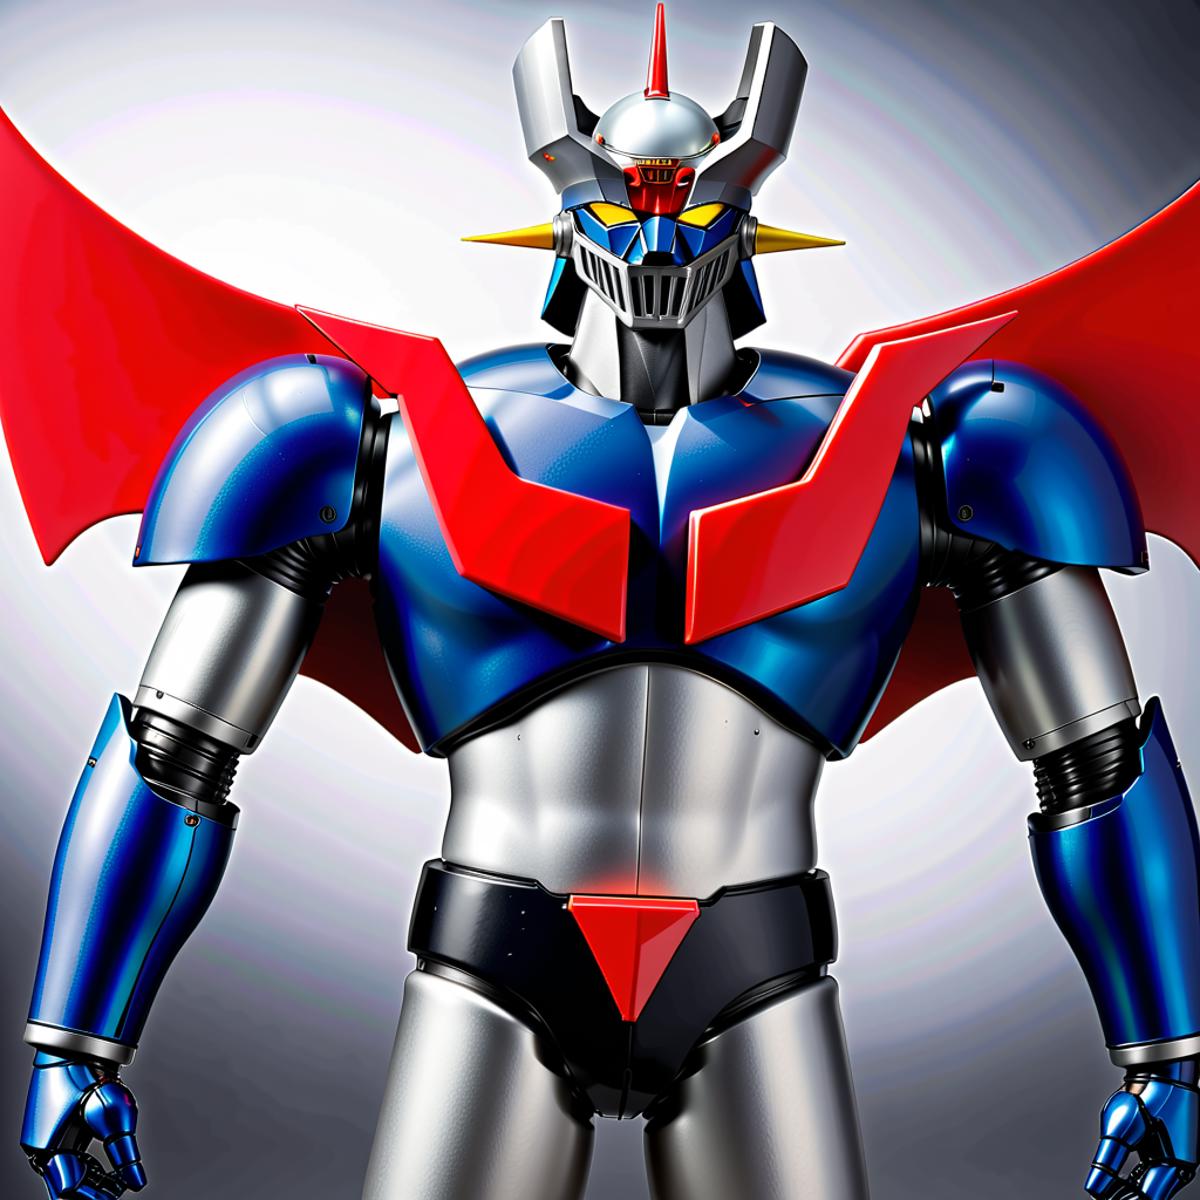 Mazinger Z image by t81wh12merb6